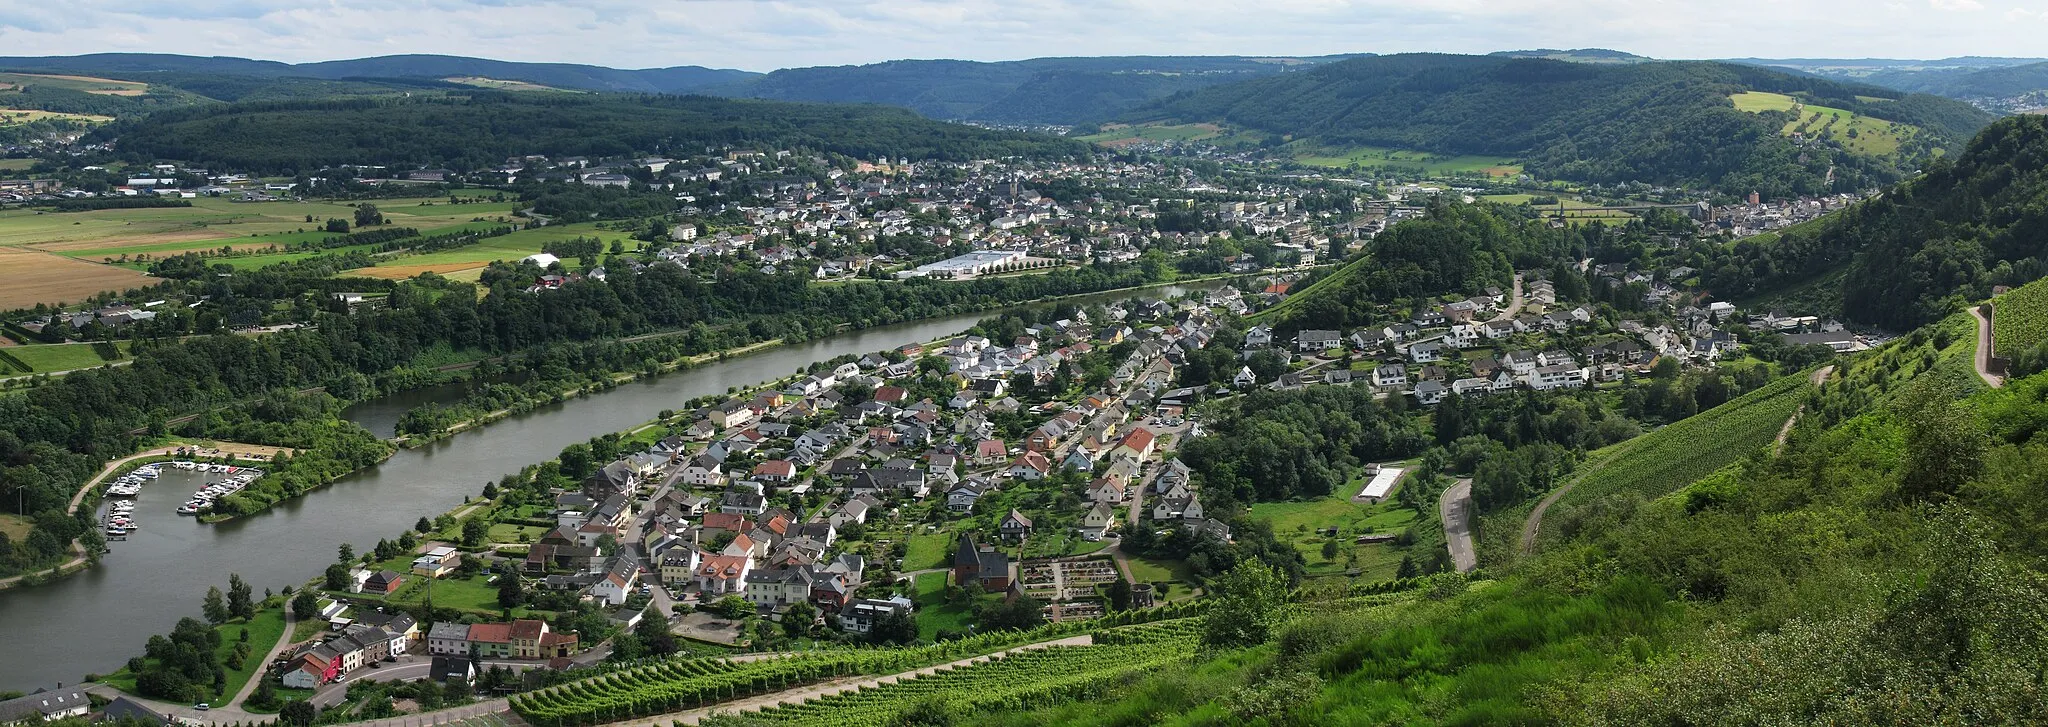 Image of Trier